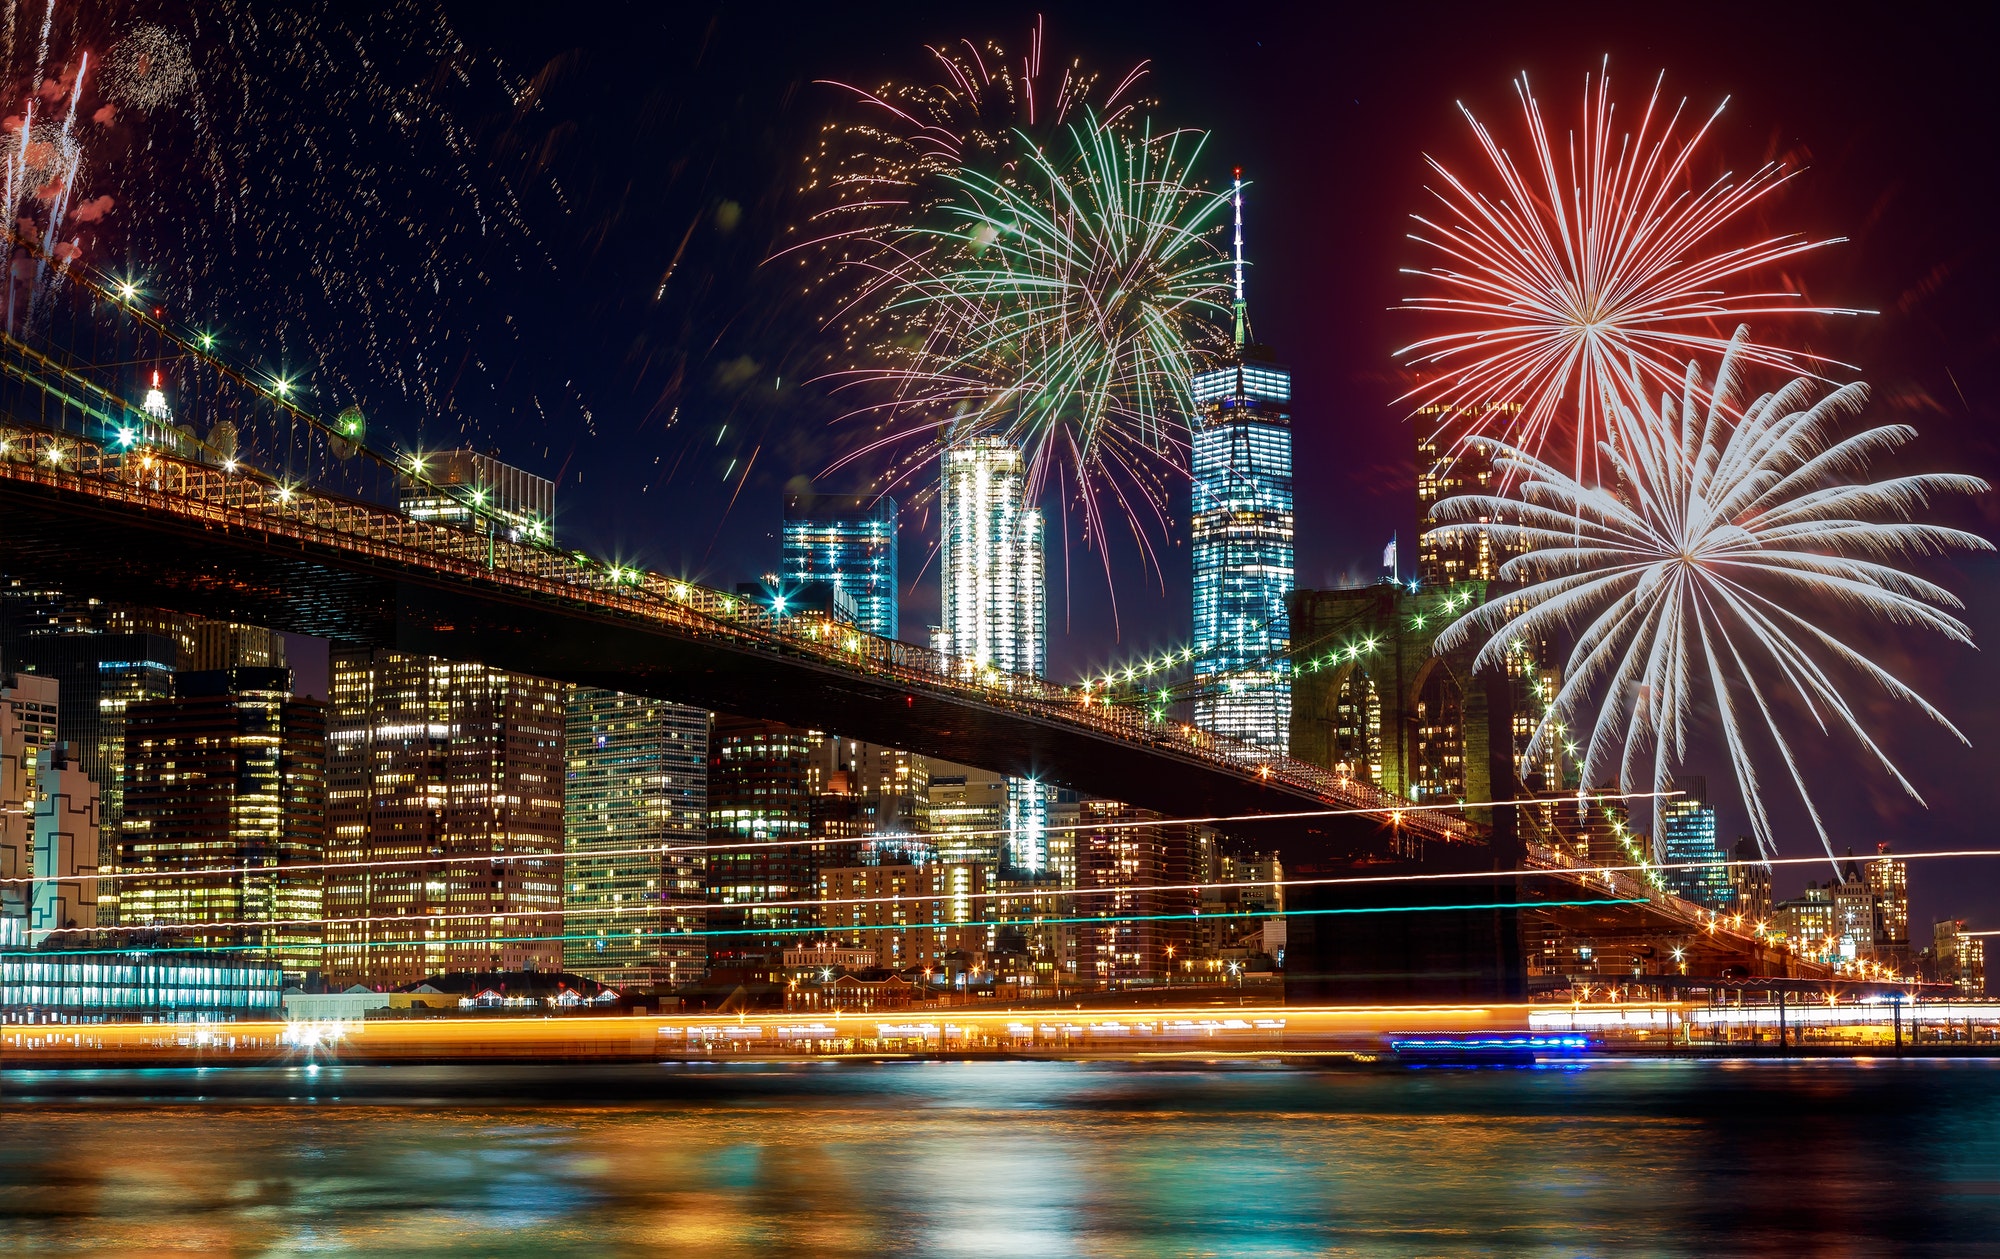 Colorful holiday fireworks panoramic view New York city Manhattan downtown skyline at night with